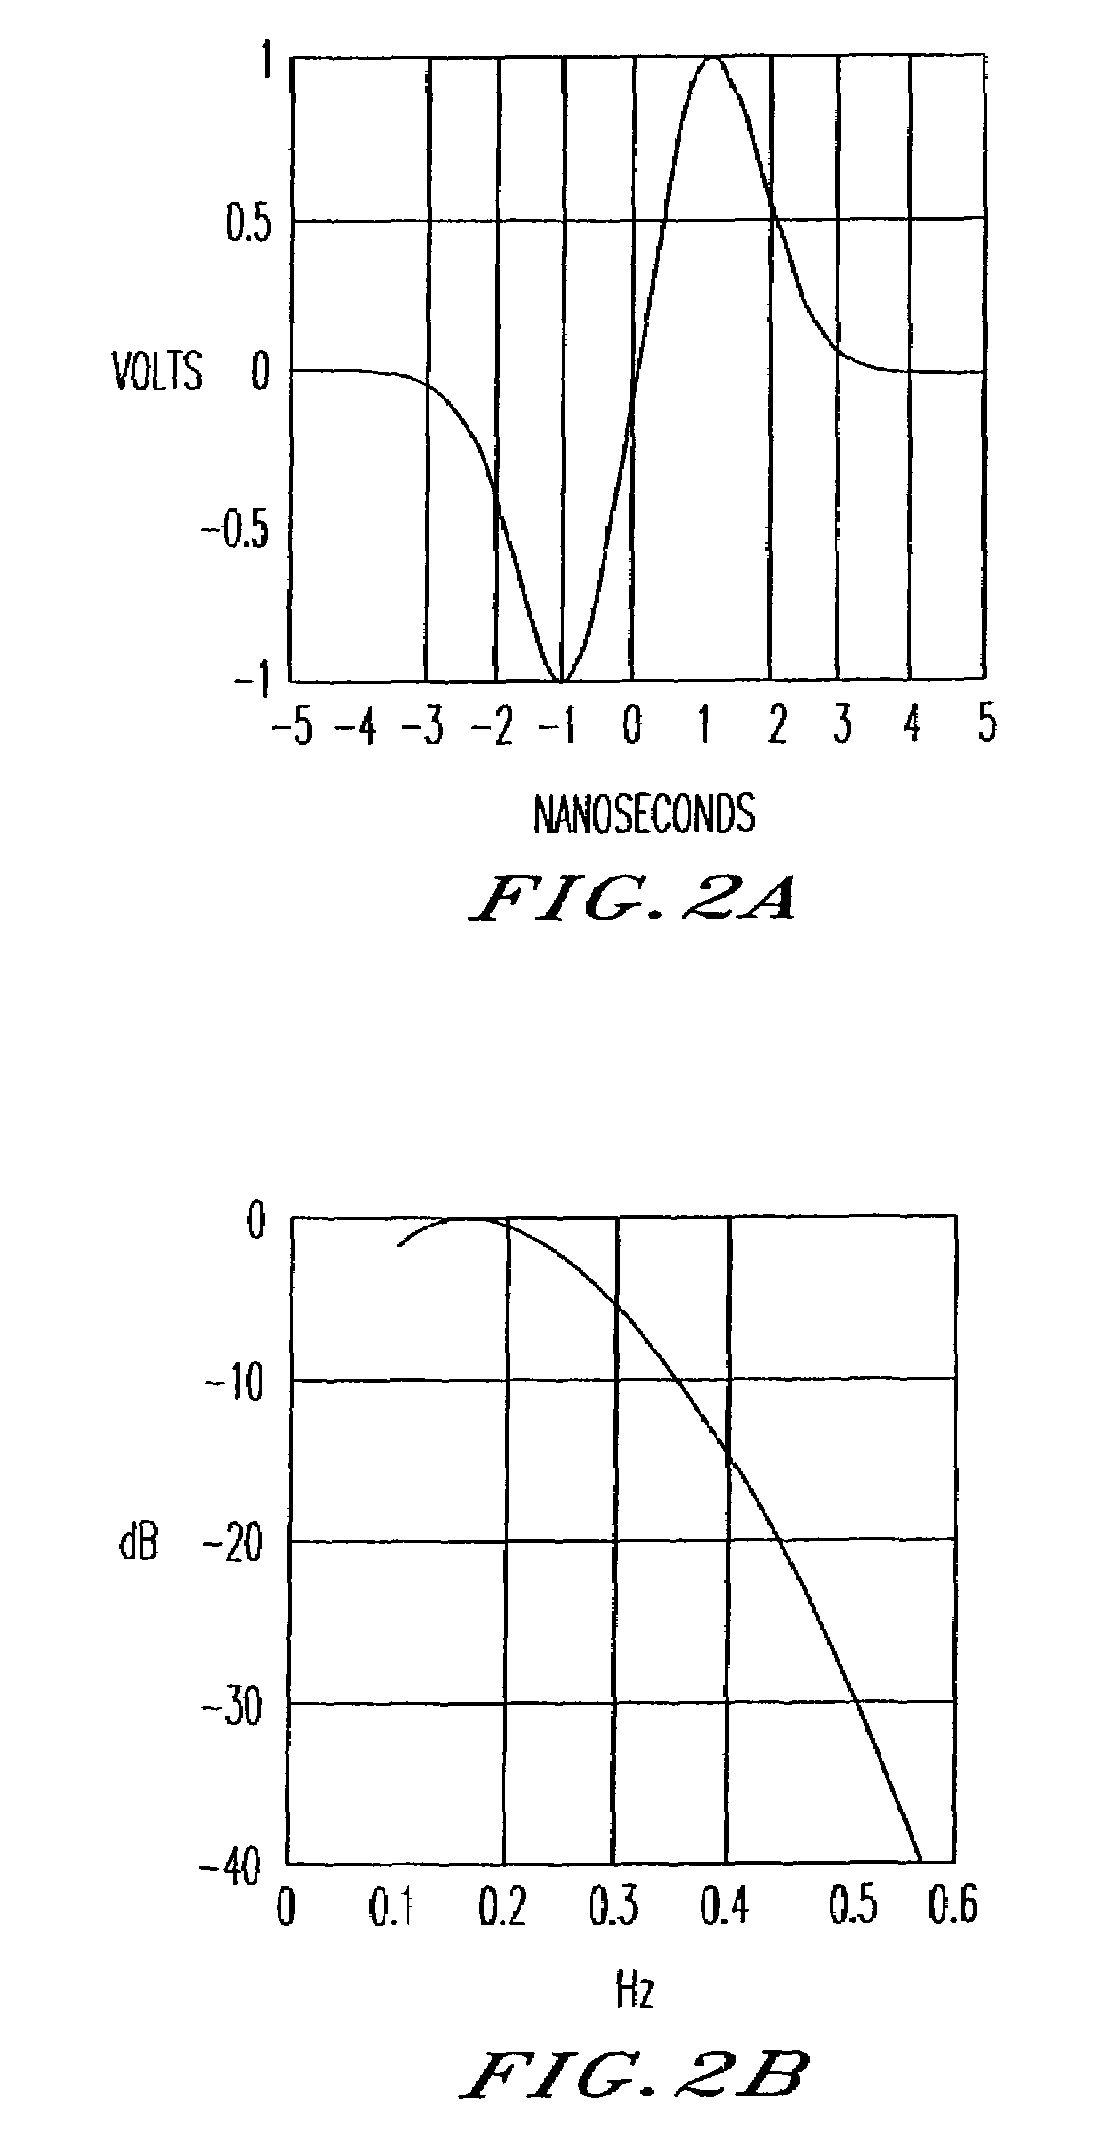 Ultra wide bandwidth communications method and system